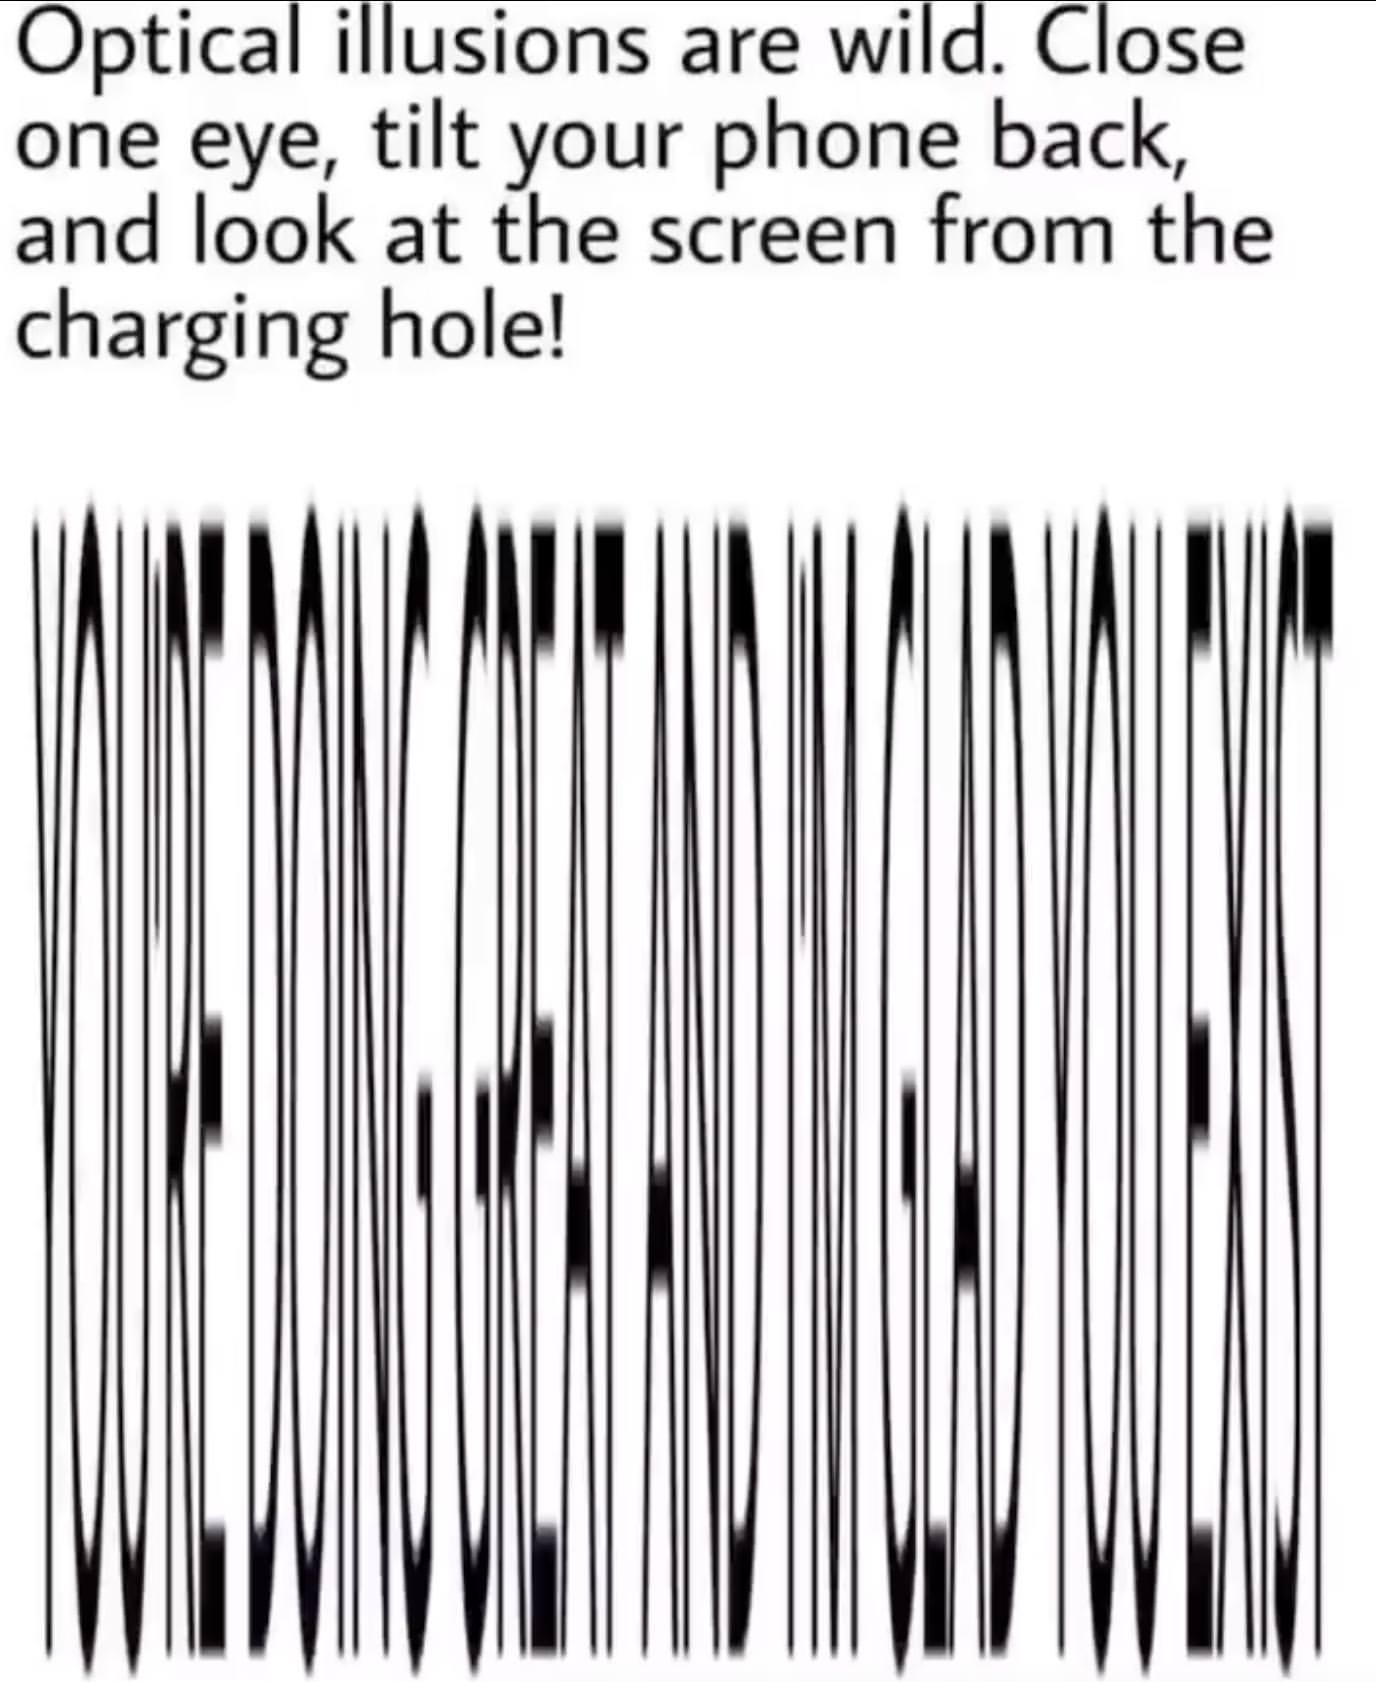 Optical illusions are wild. Close one eye, tilt your phone back, and look at the screen from the charging hole!